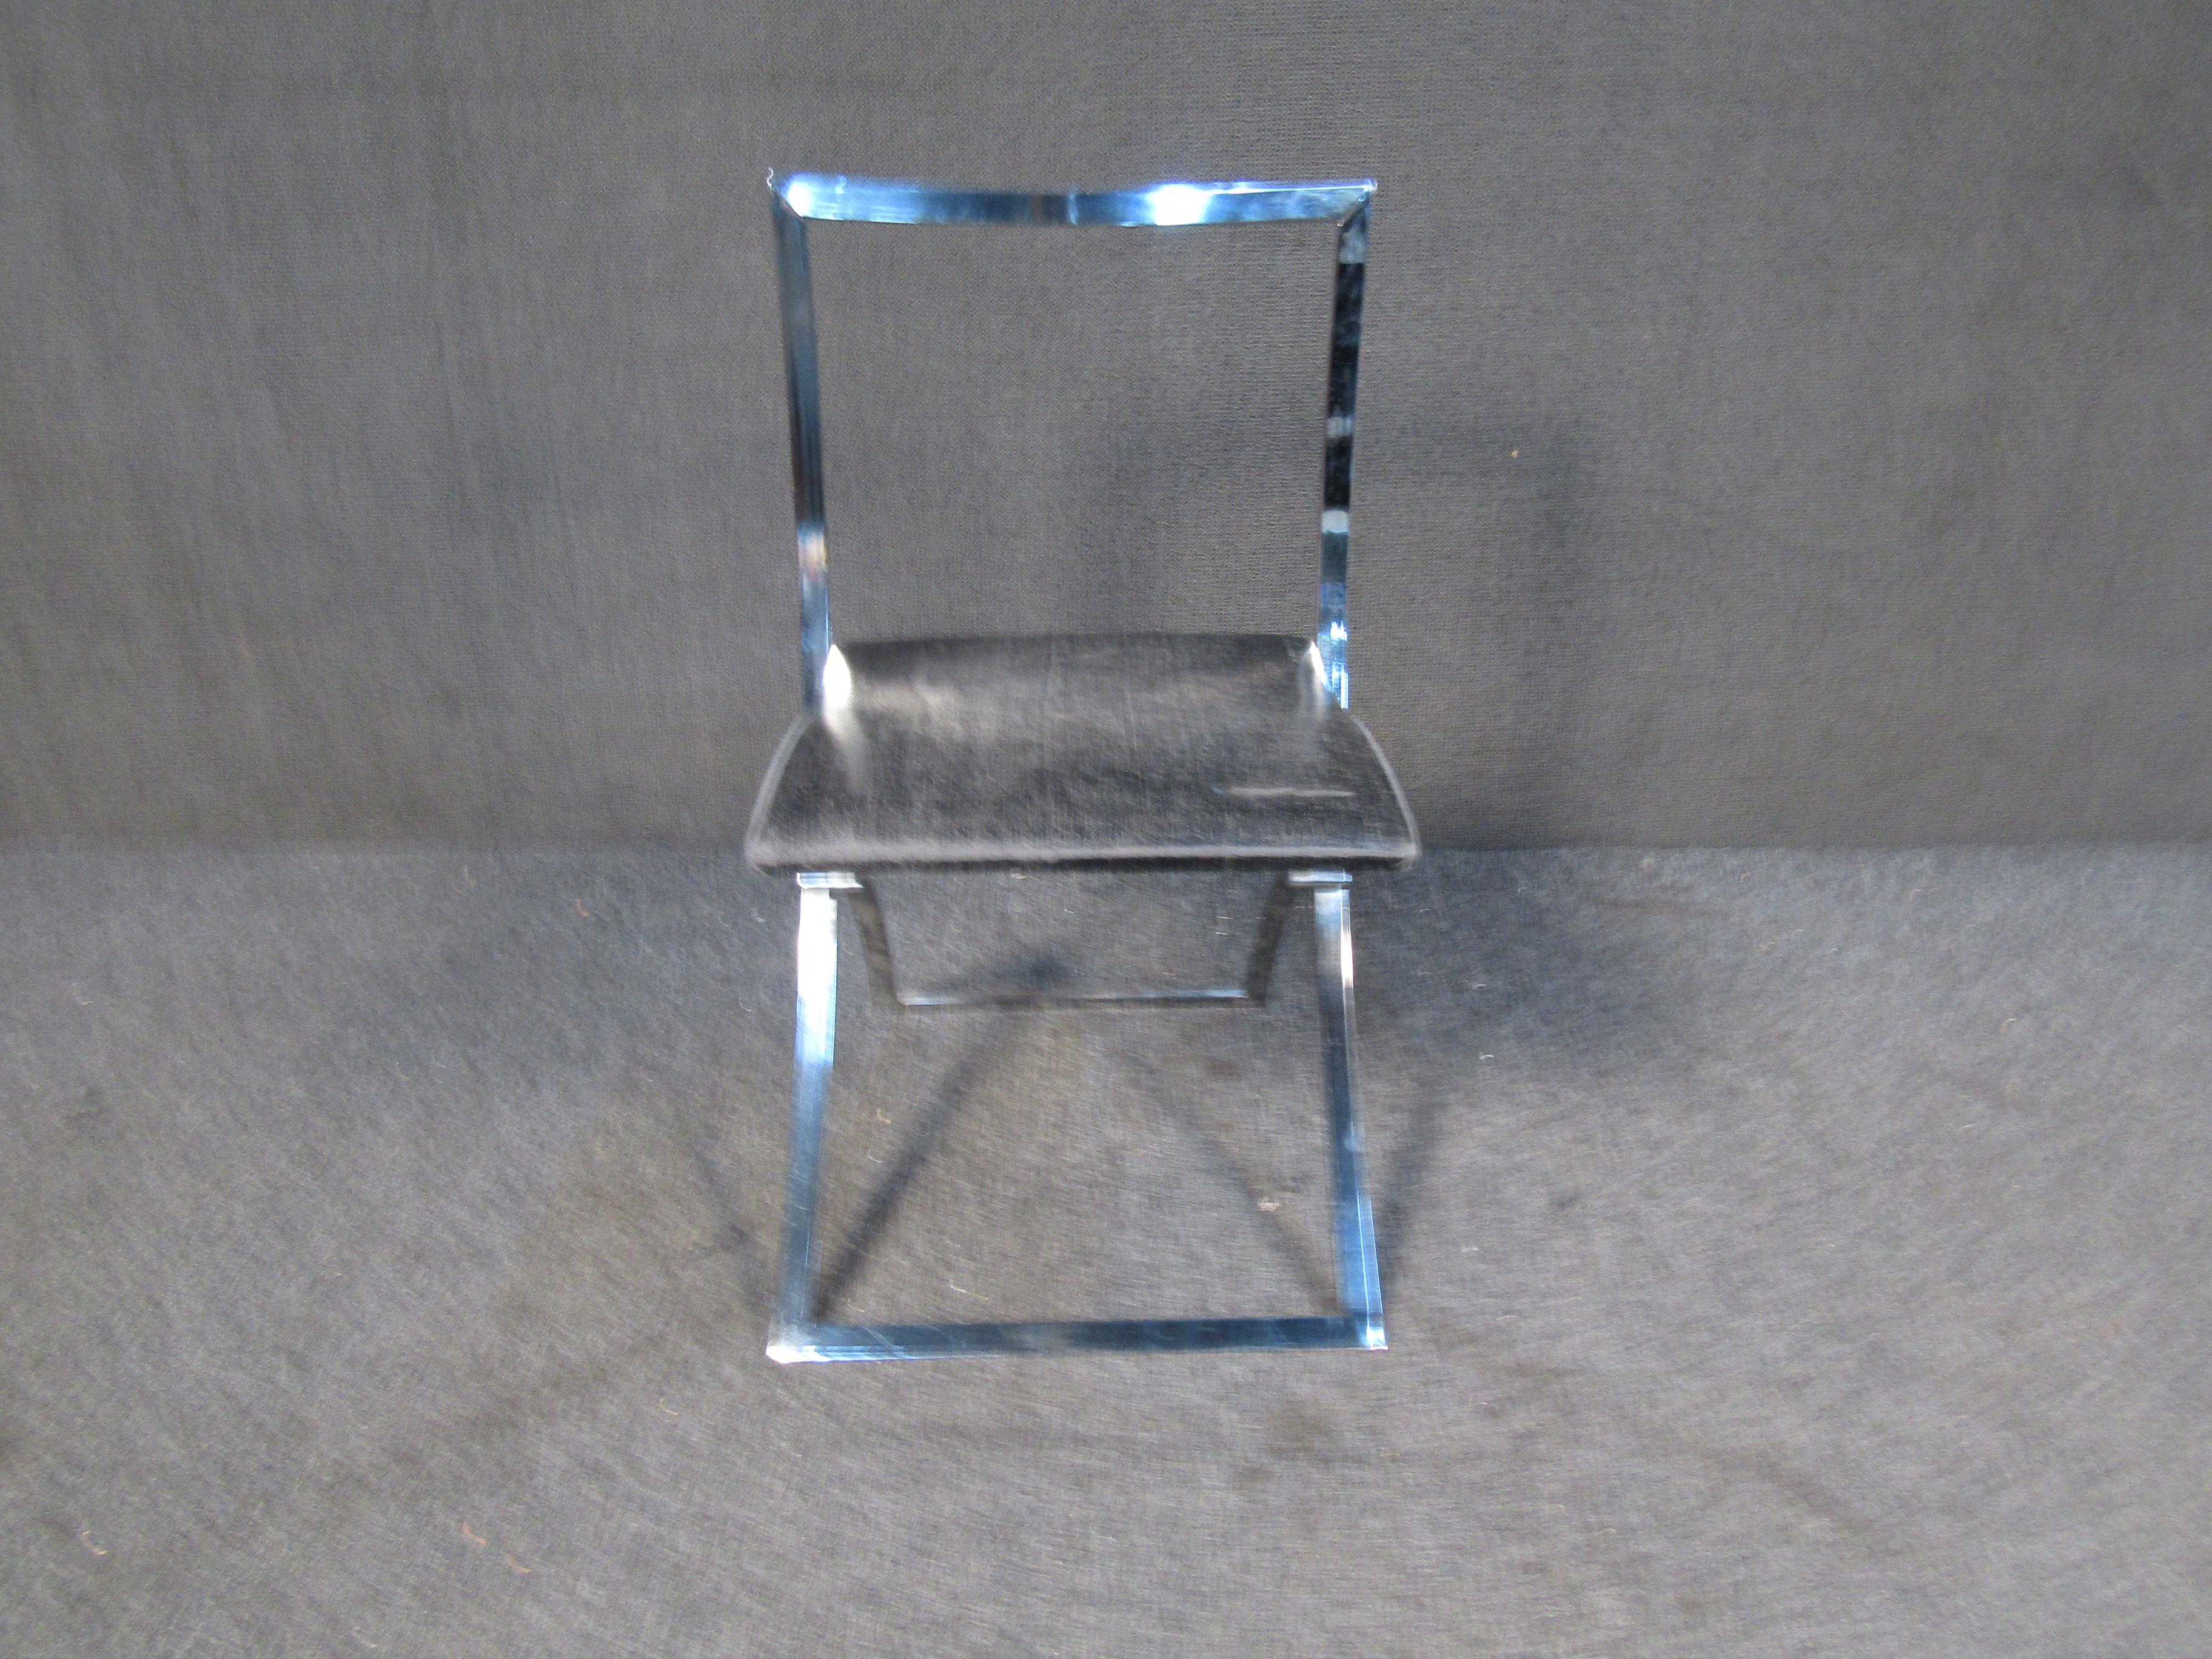 With an elegant frame, upholstered seat, and bright chrome finish, this vintage Italian folding chair offers style in a compact design. Please confirm item location with seller (NY/NJ).